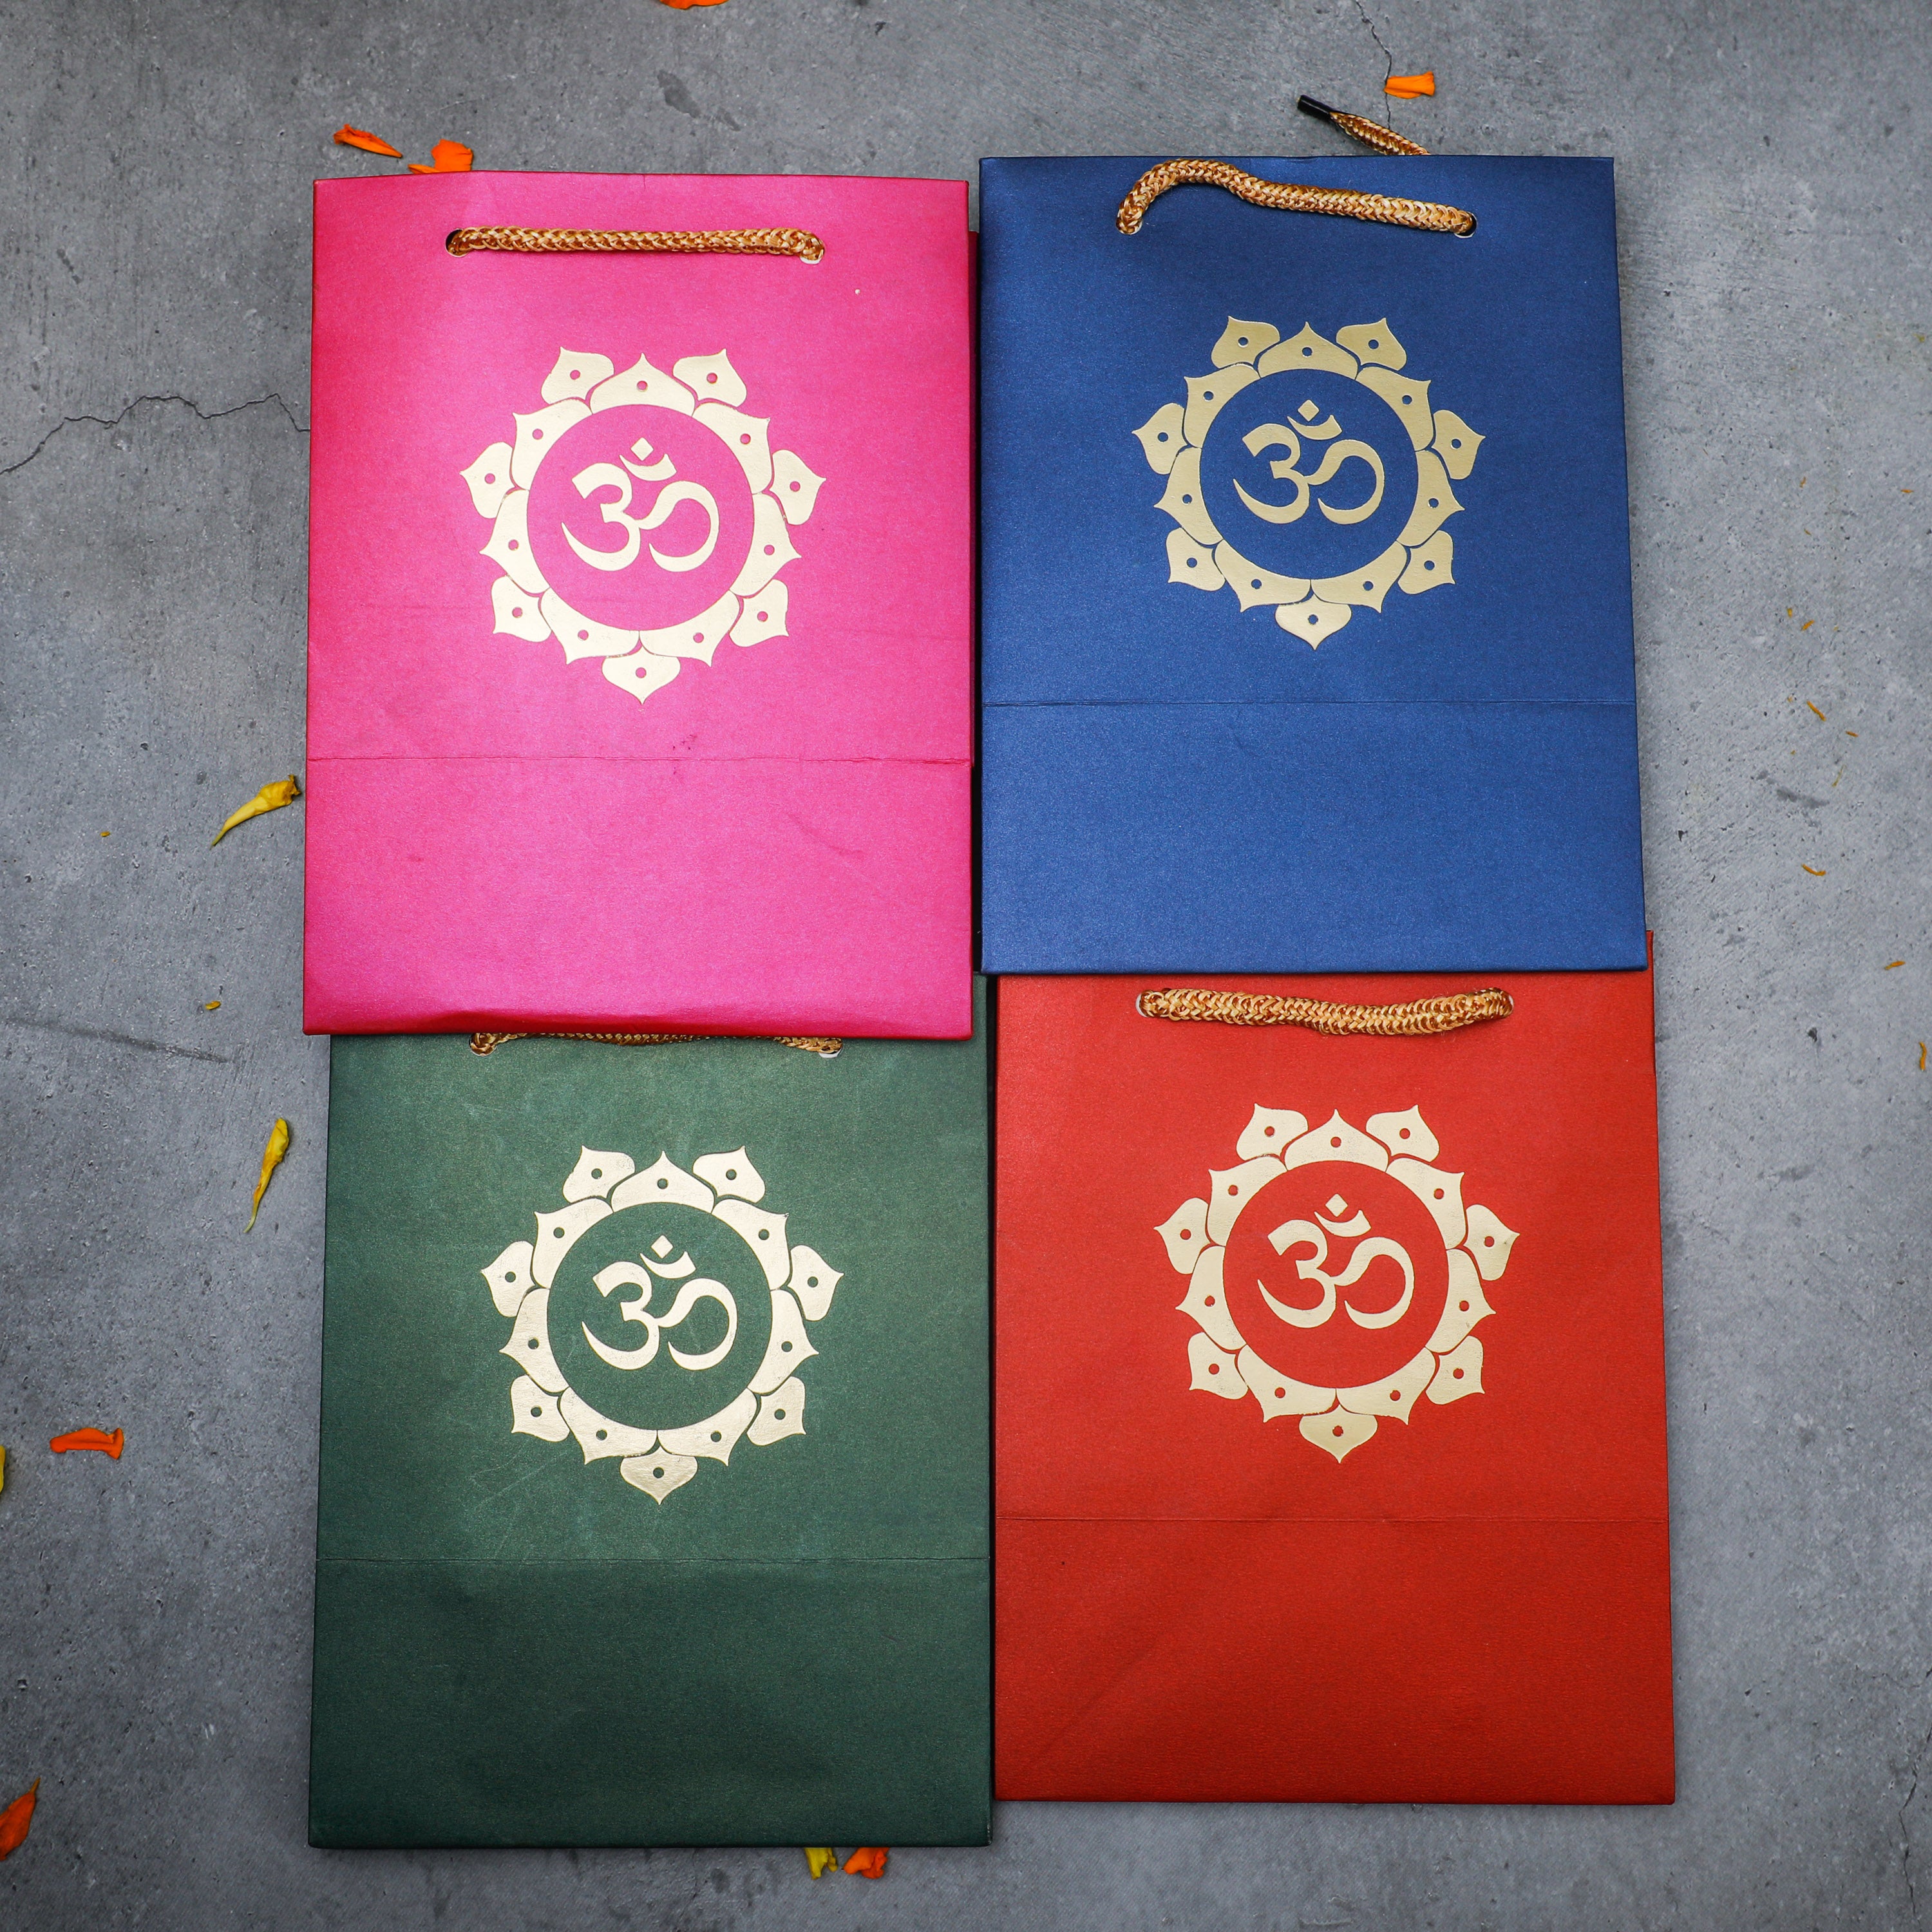 Our range of handbags exhibits beautiful Om prints and colors